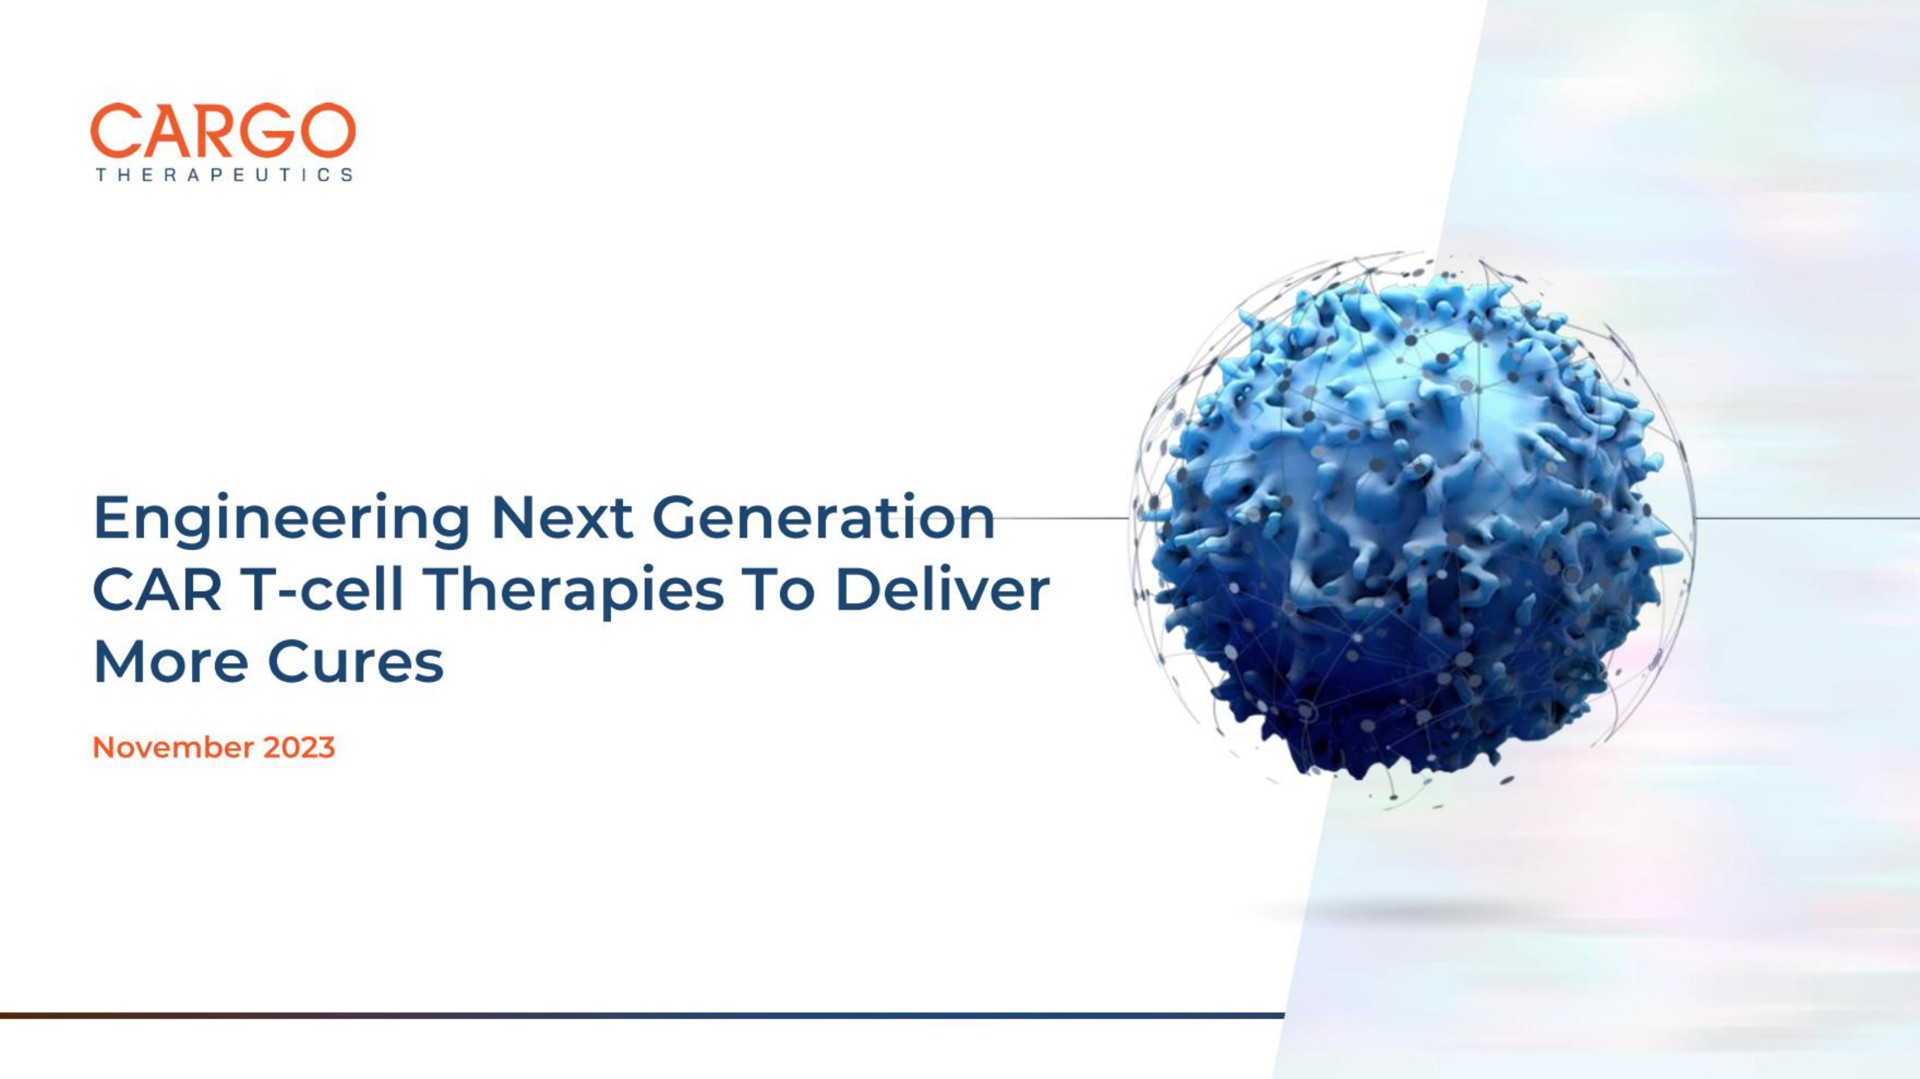 cargo engineering next generation car cell therapies to deliver more cures | CARGO Therapeutics